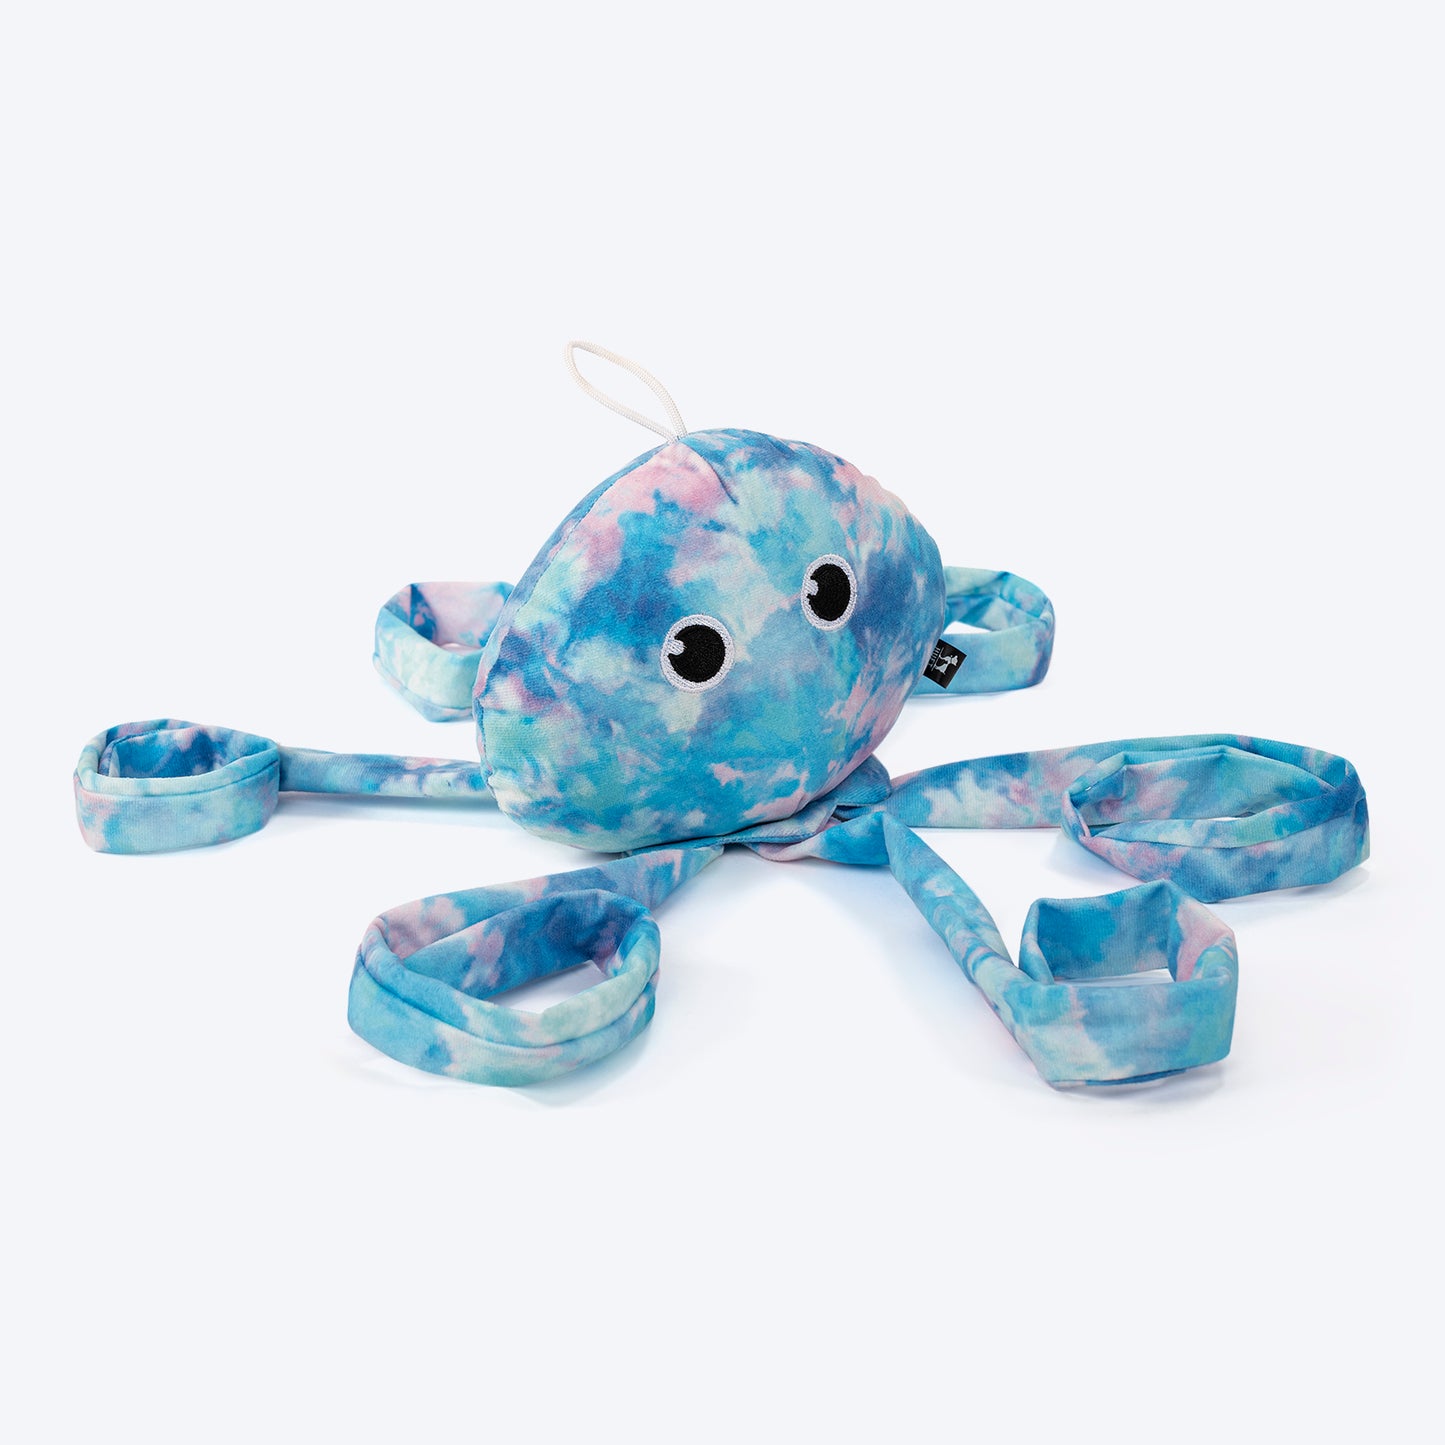 HUFT Octopus Big Cuddle Toy For Dogs - Heads Up For Tails